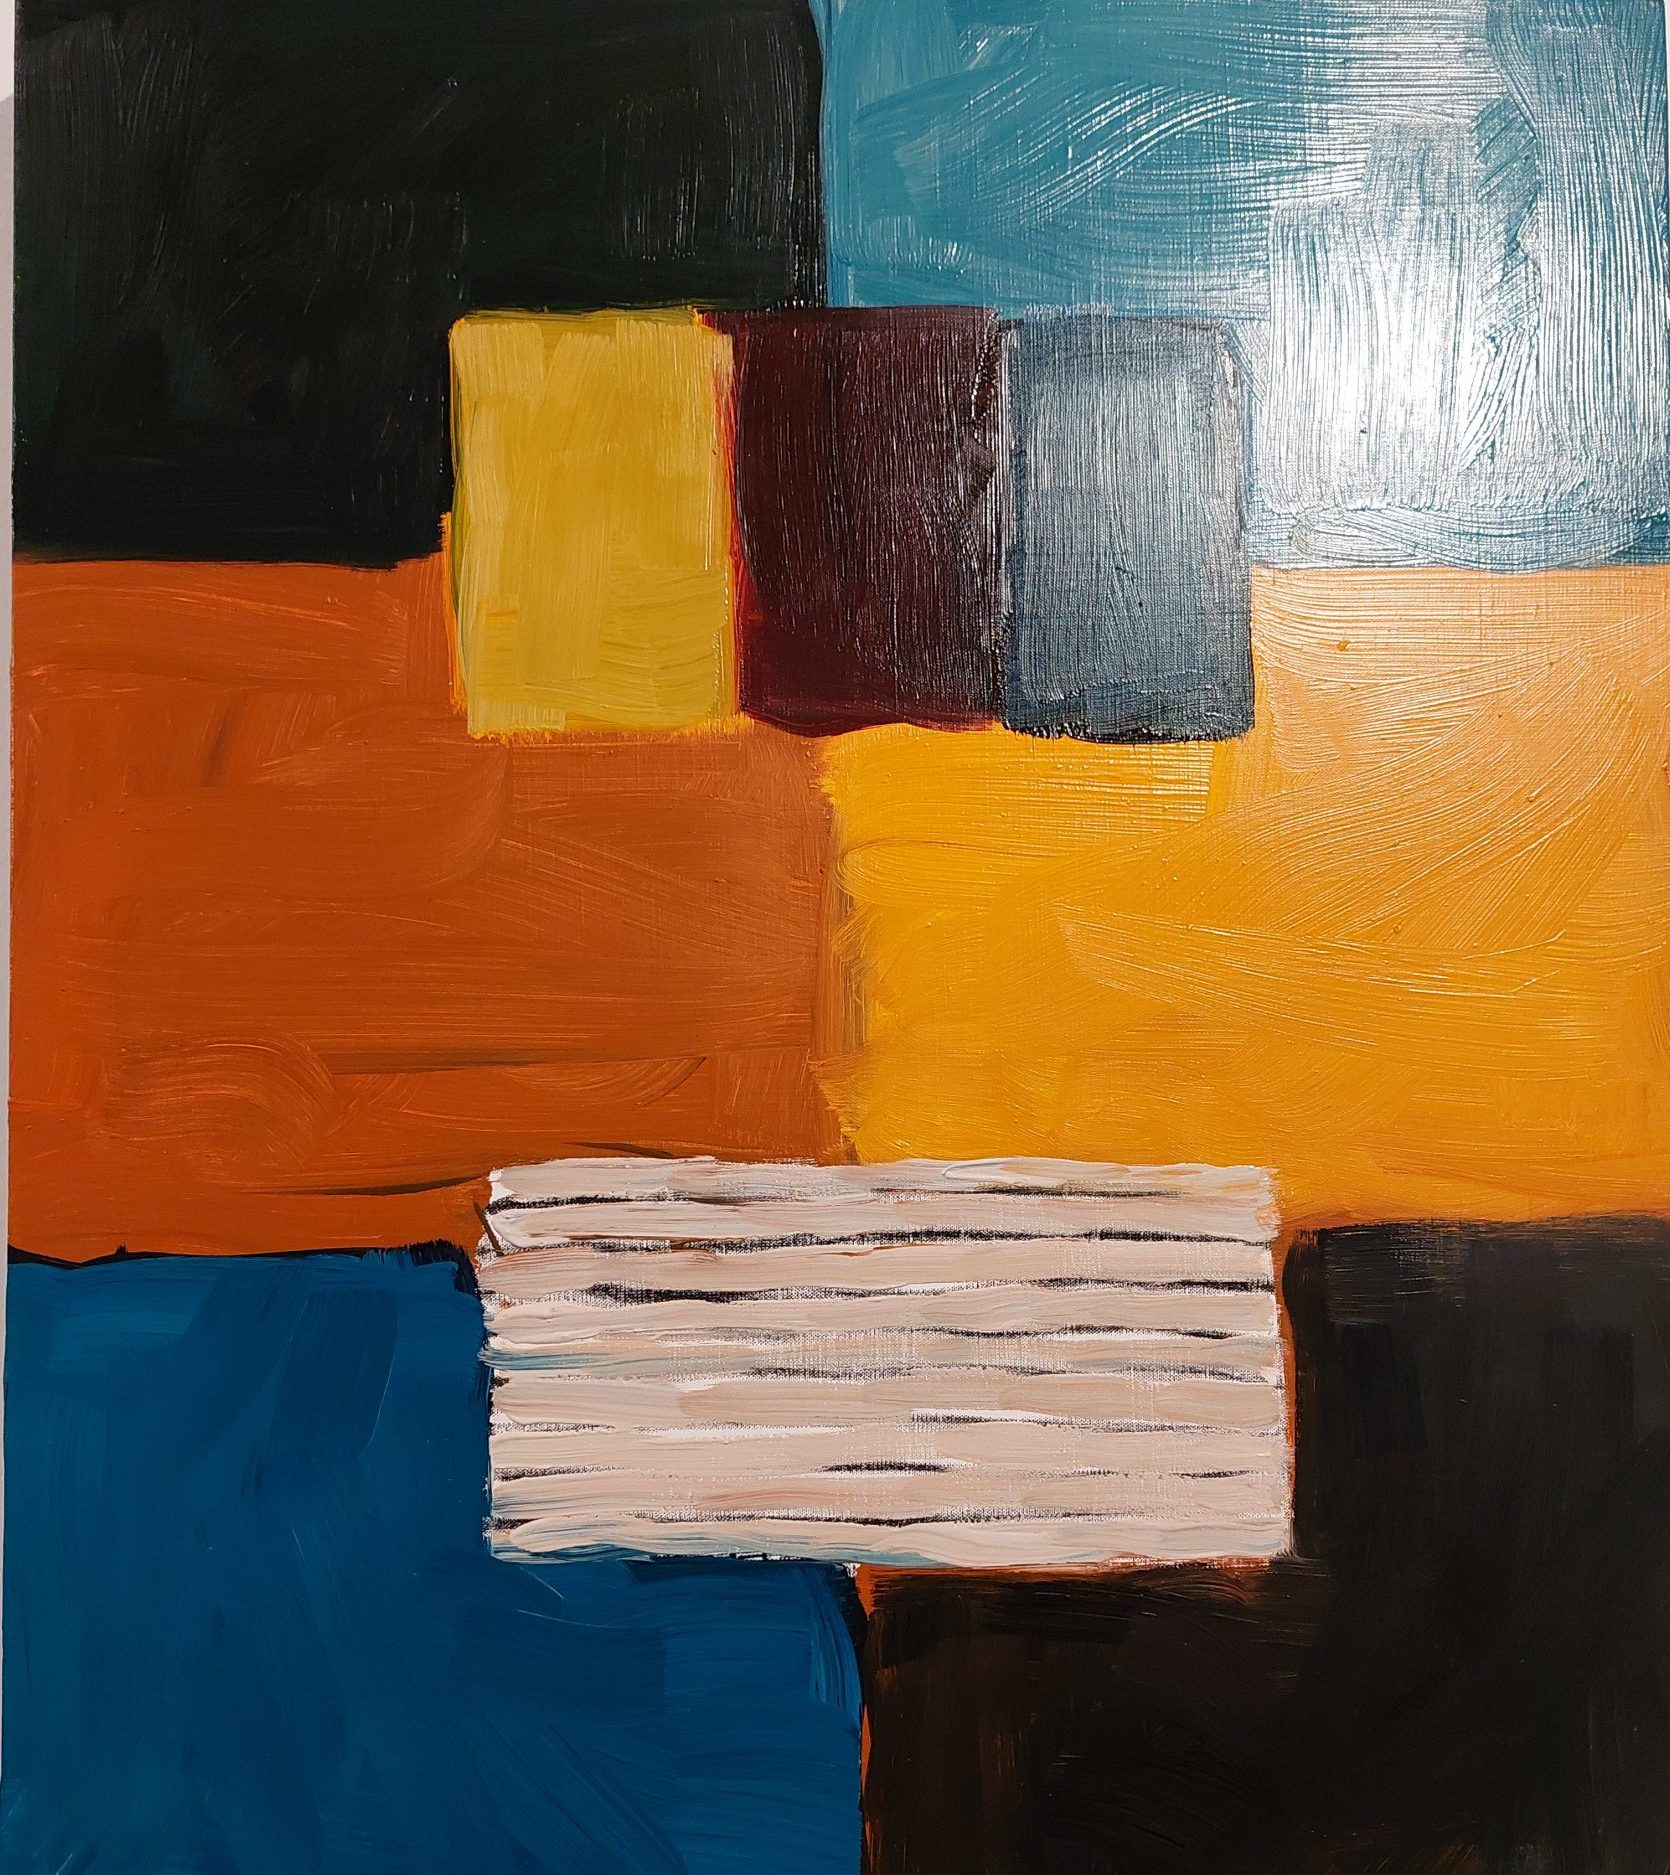 London calling Sean Scully